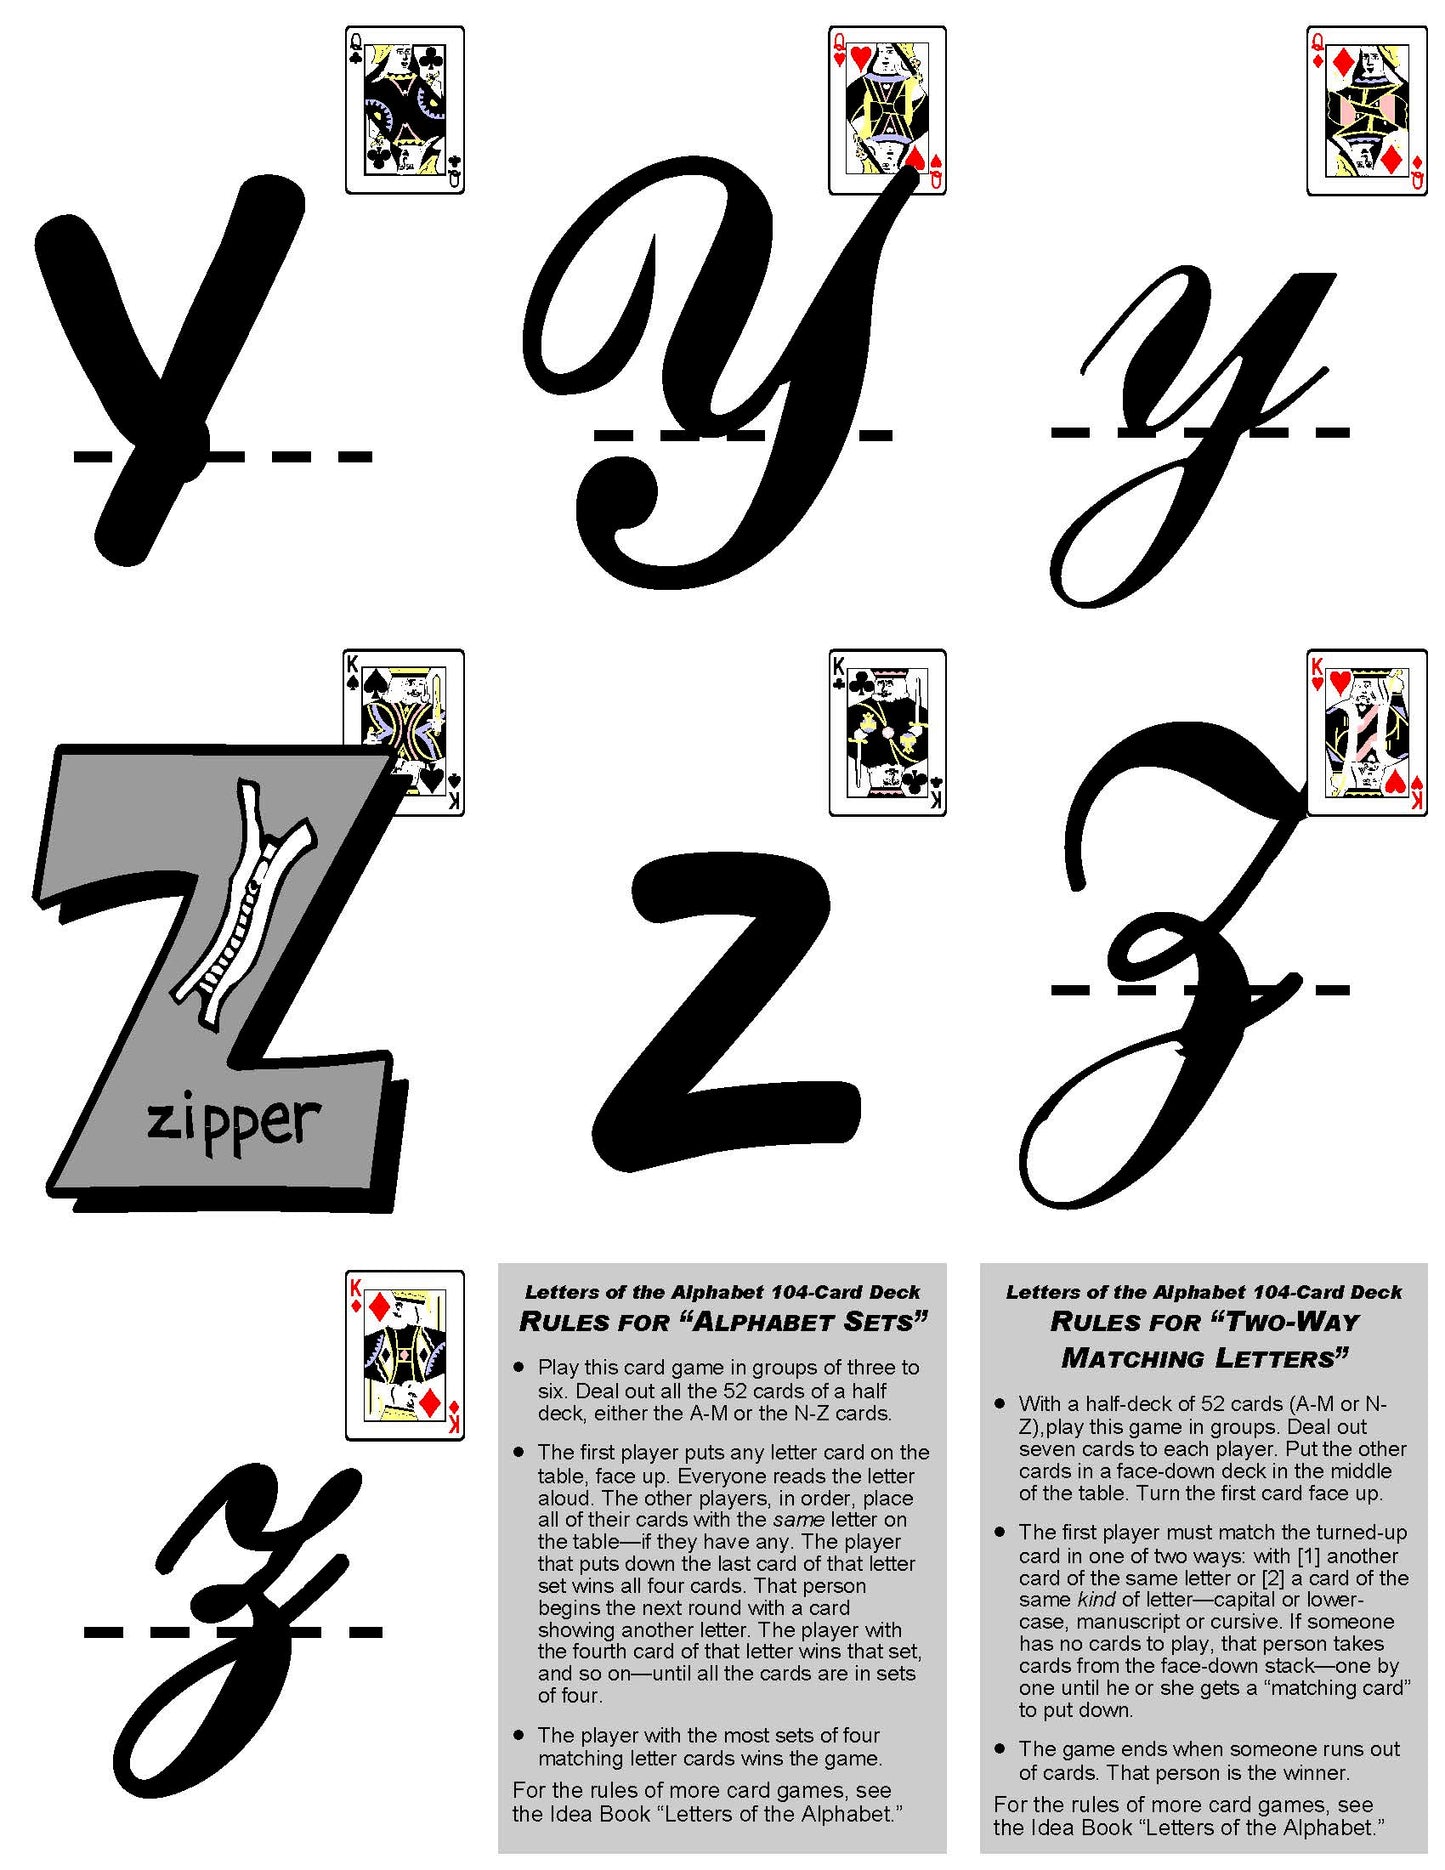 A-07.7: Use Alphabet-Letter Cards AaAa to ZzZz, Version 5, in Learning Activities & Games